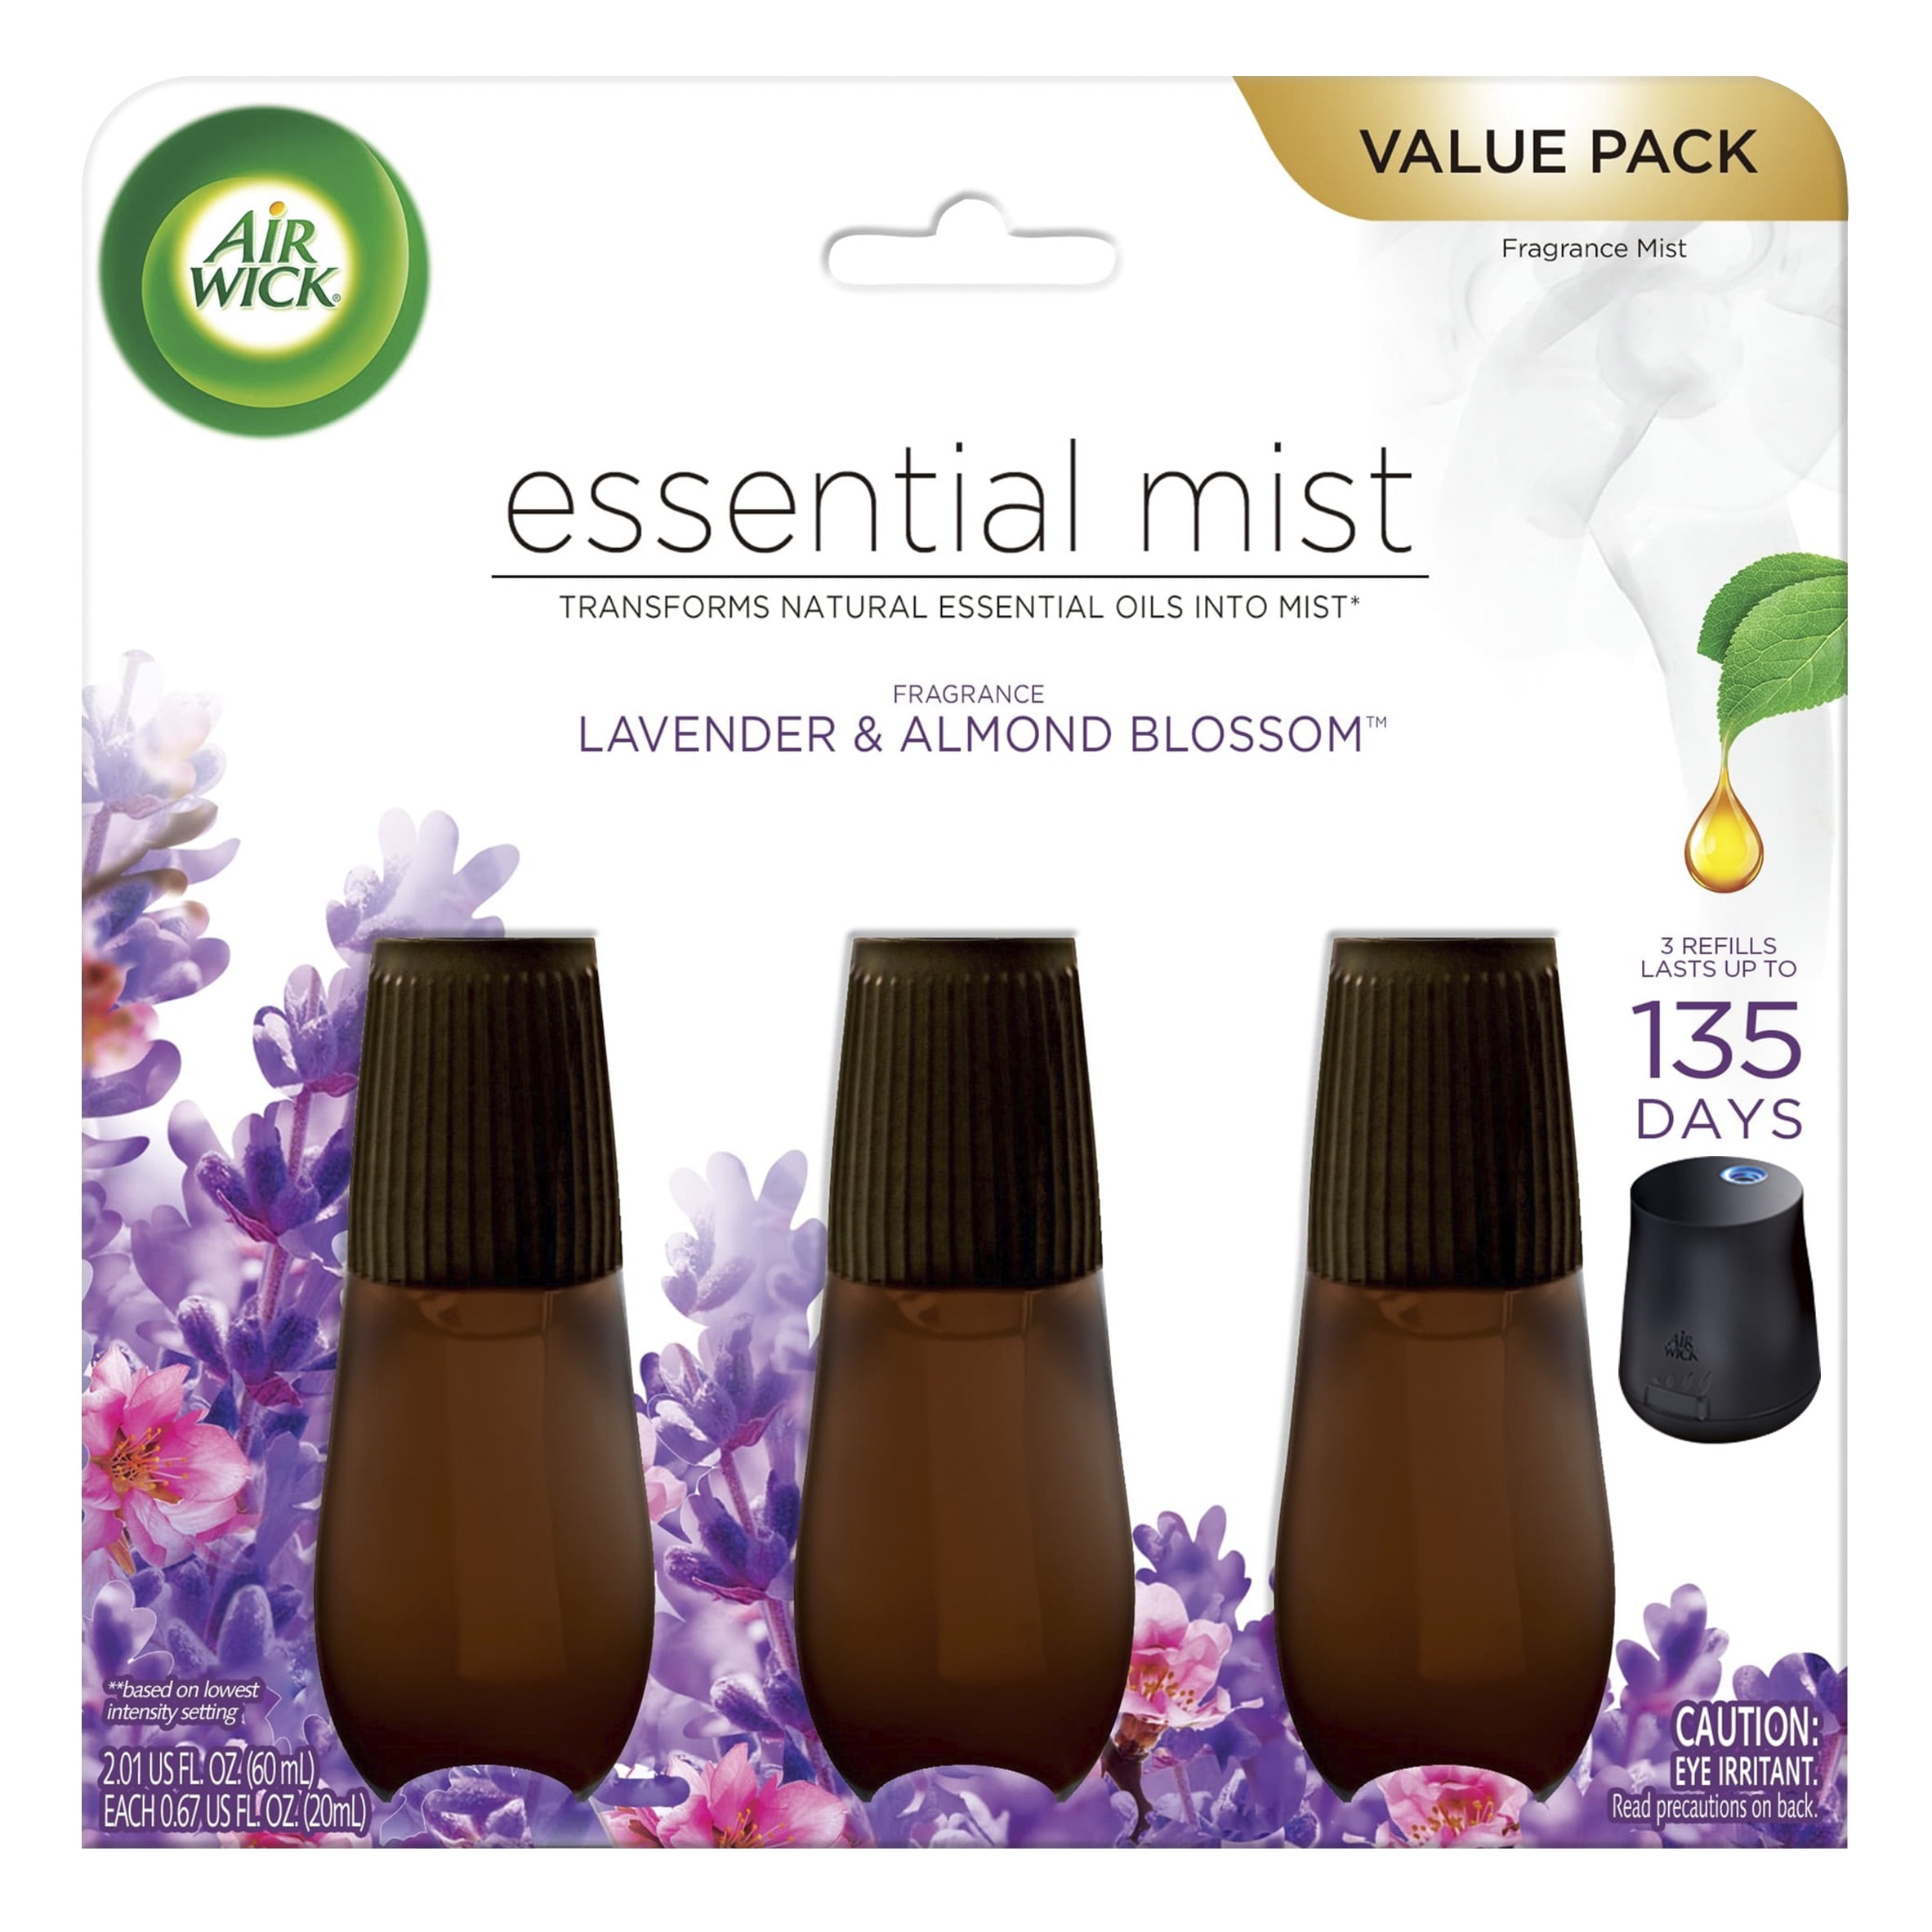 Air Wick Essential Mist Refill, 3 ct, Lavender and Almond Blossom, Essential Oils Diffuser, Air Freshener